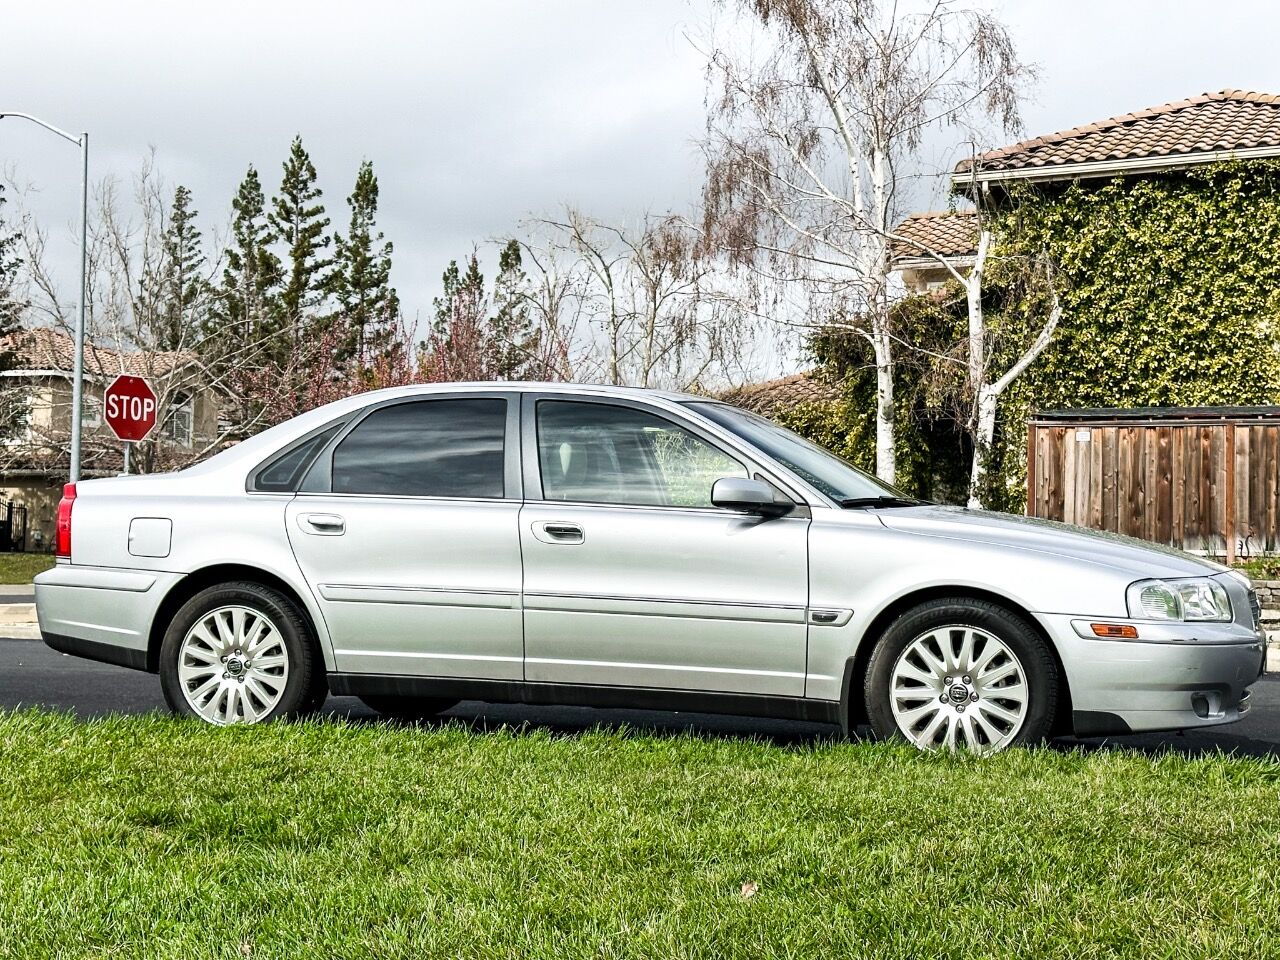 2006 Volvo S80 For Sale - Carsforsale.com®